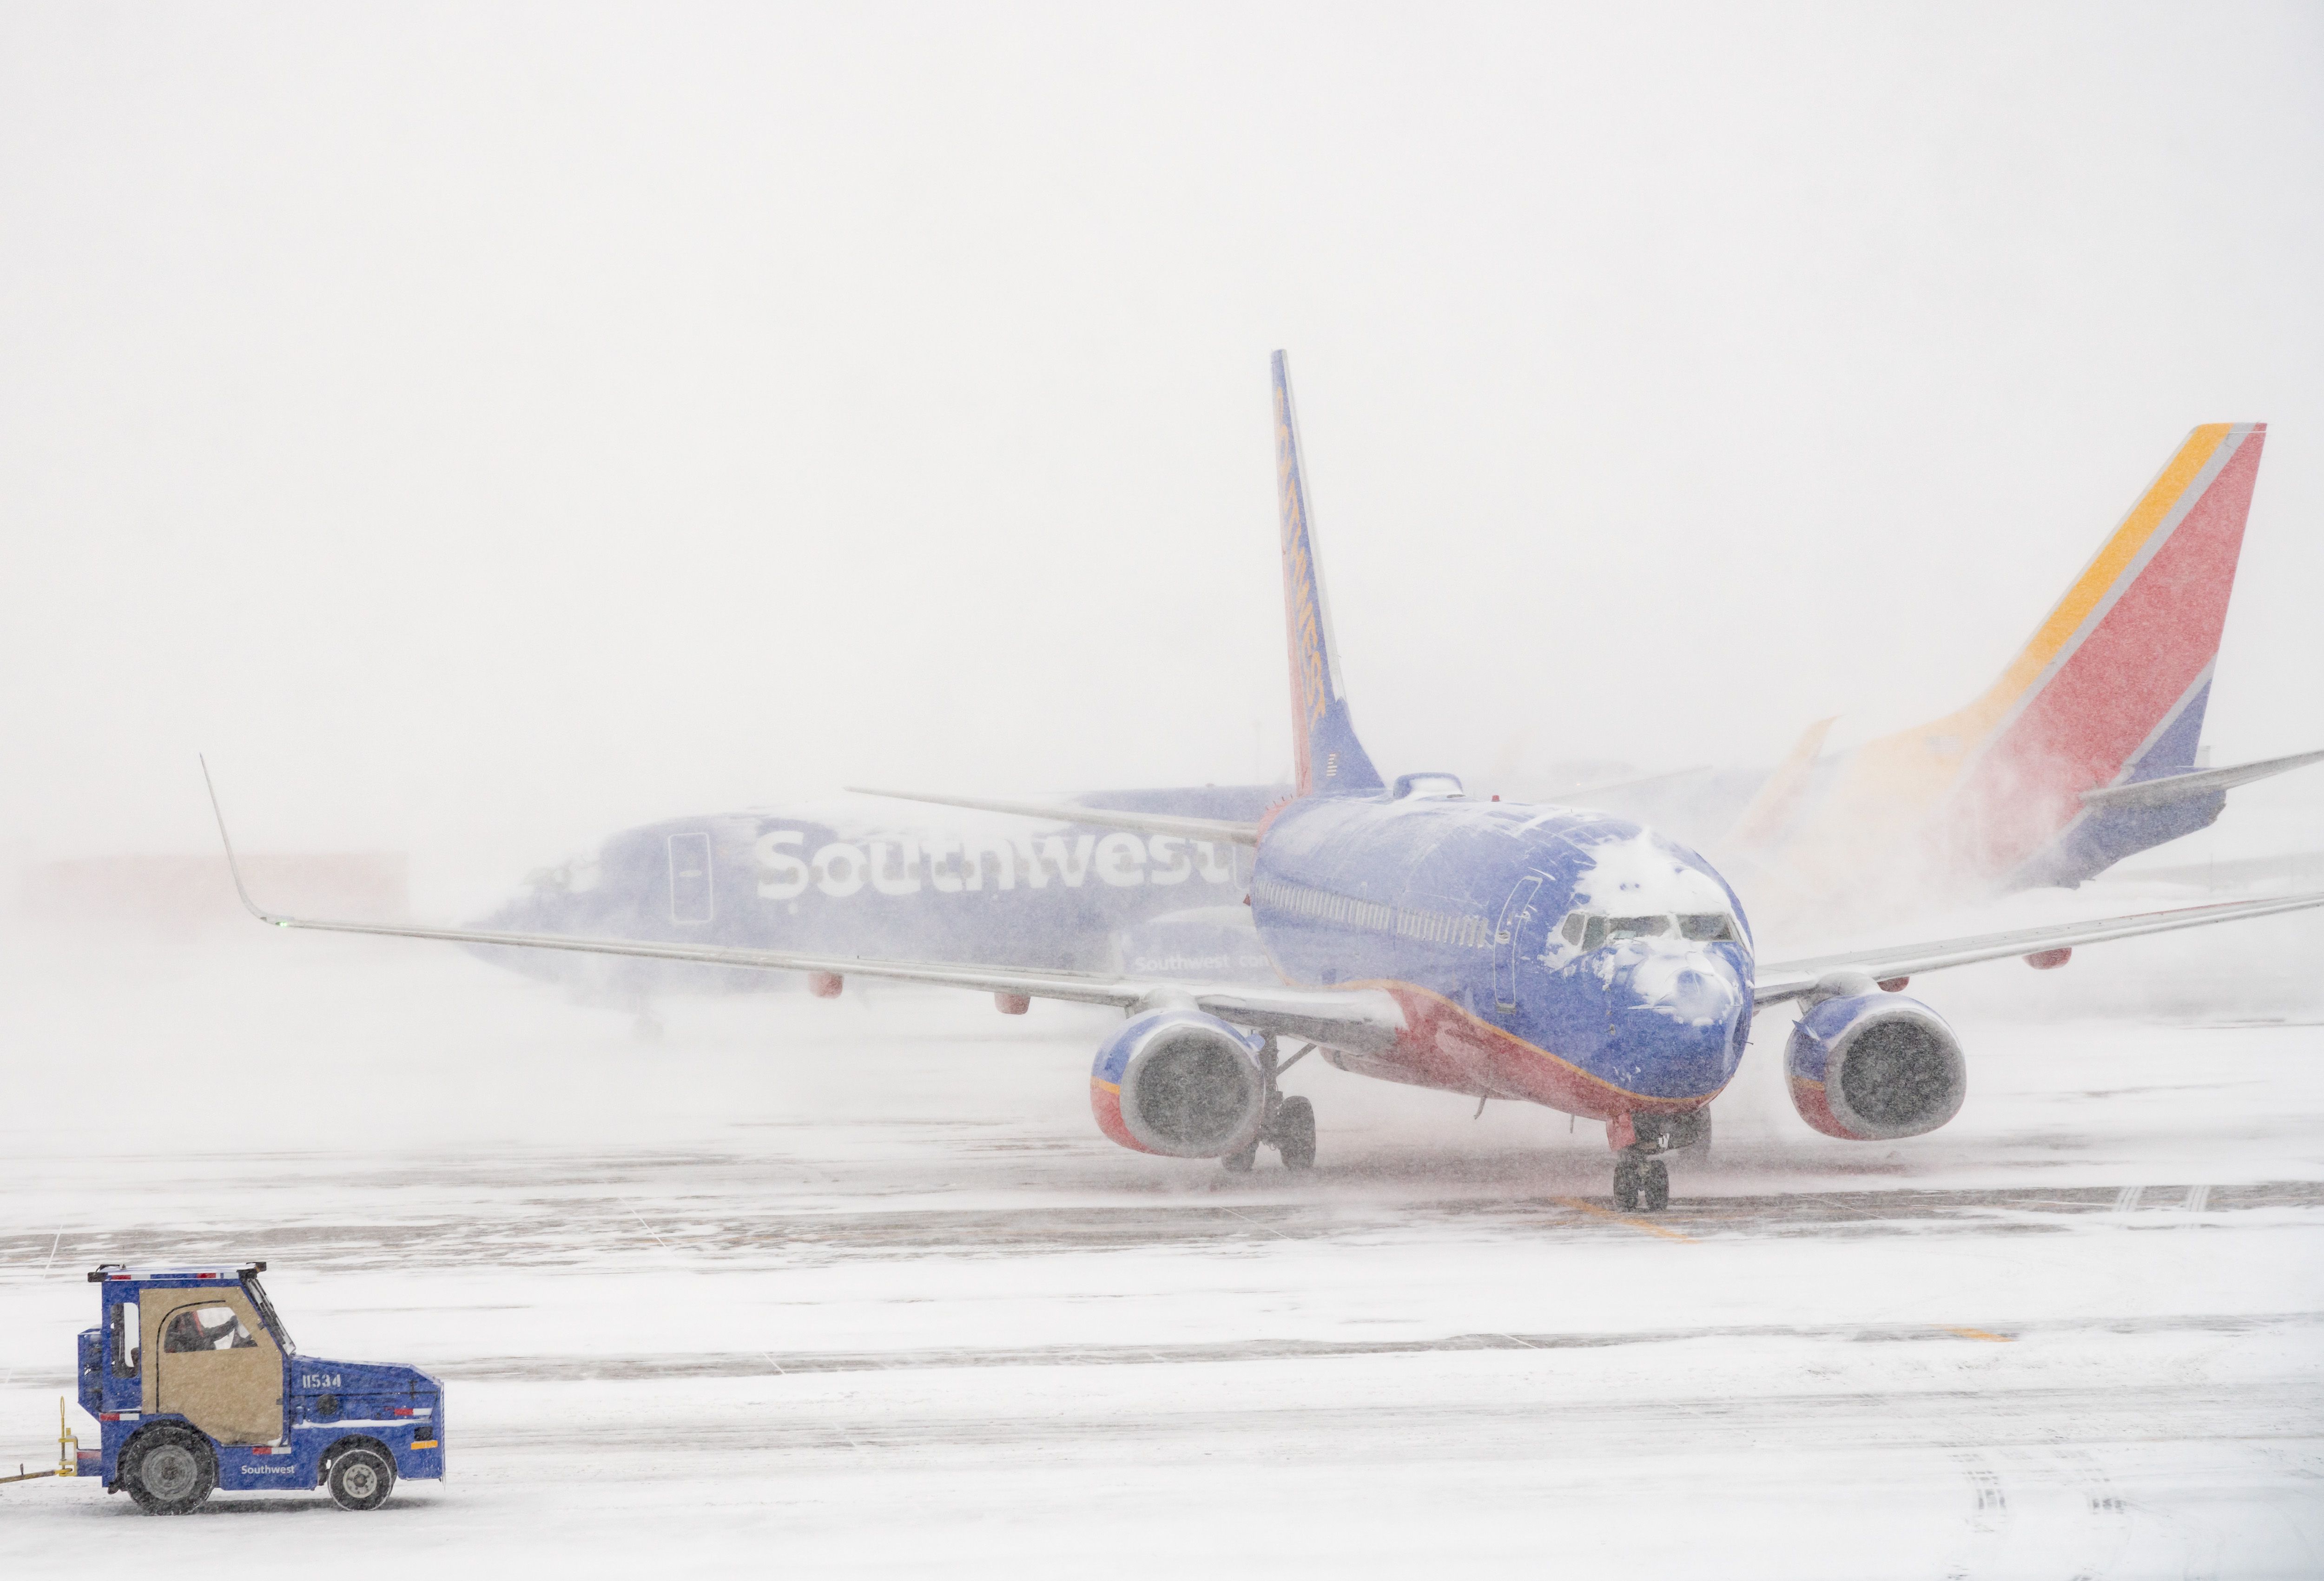 Southwest Airlines aircraft in the snow